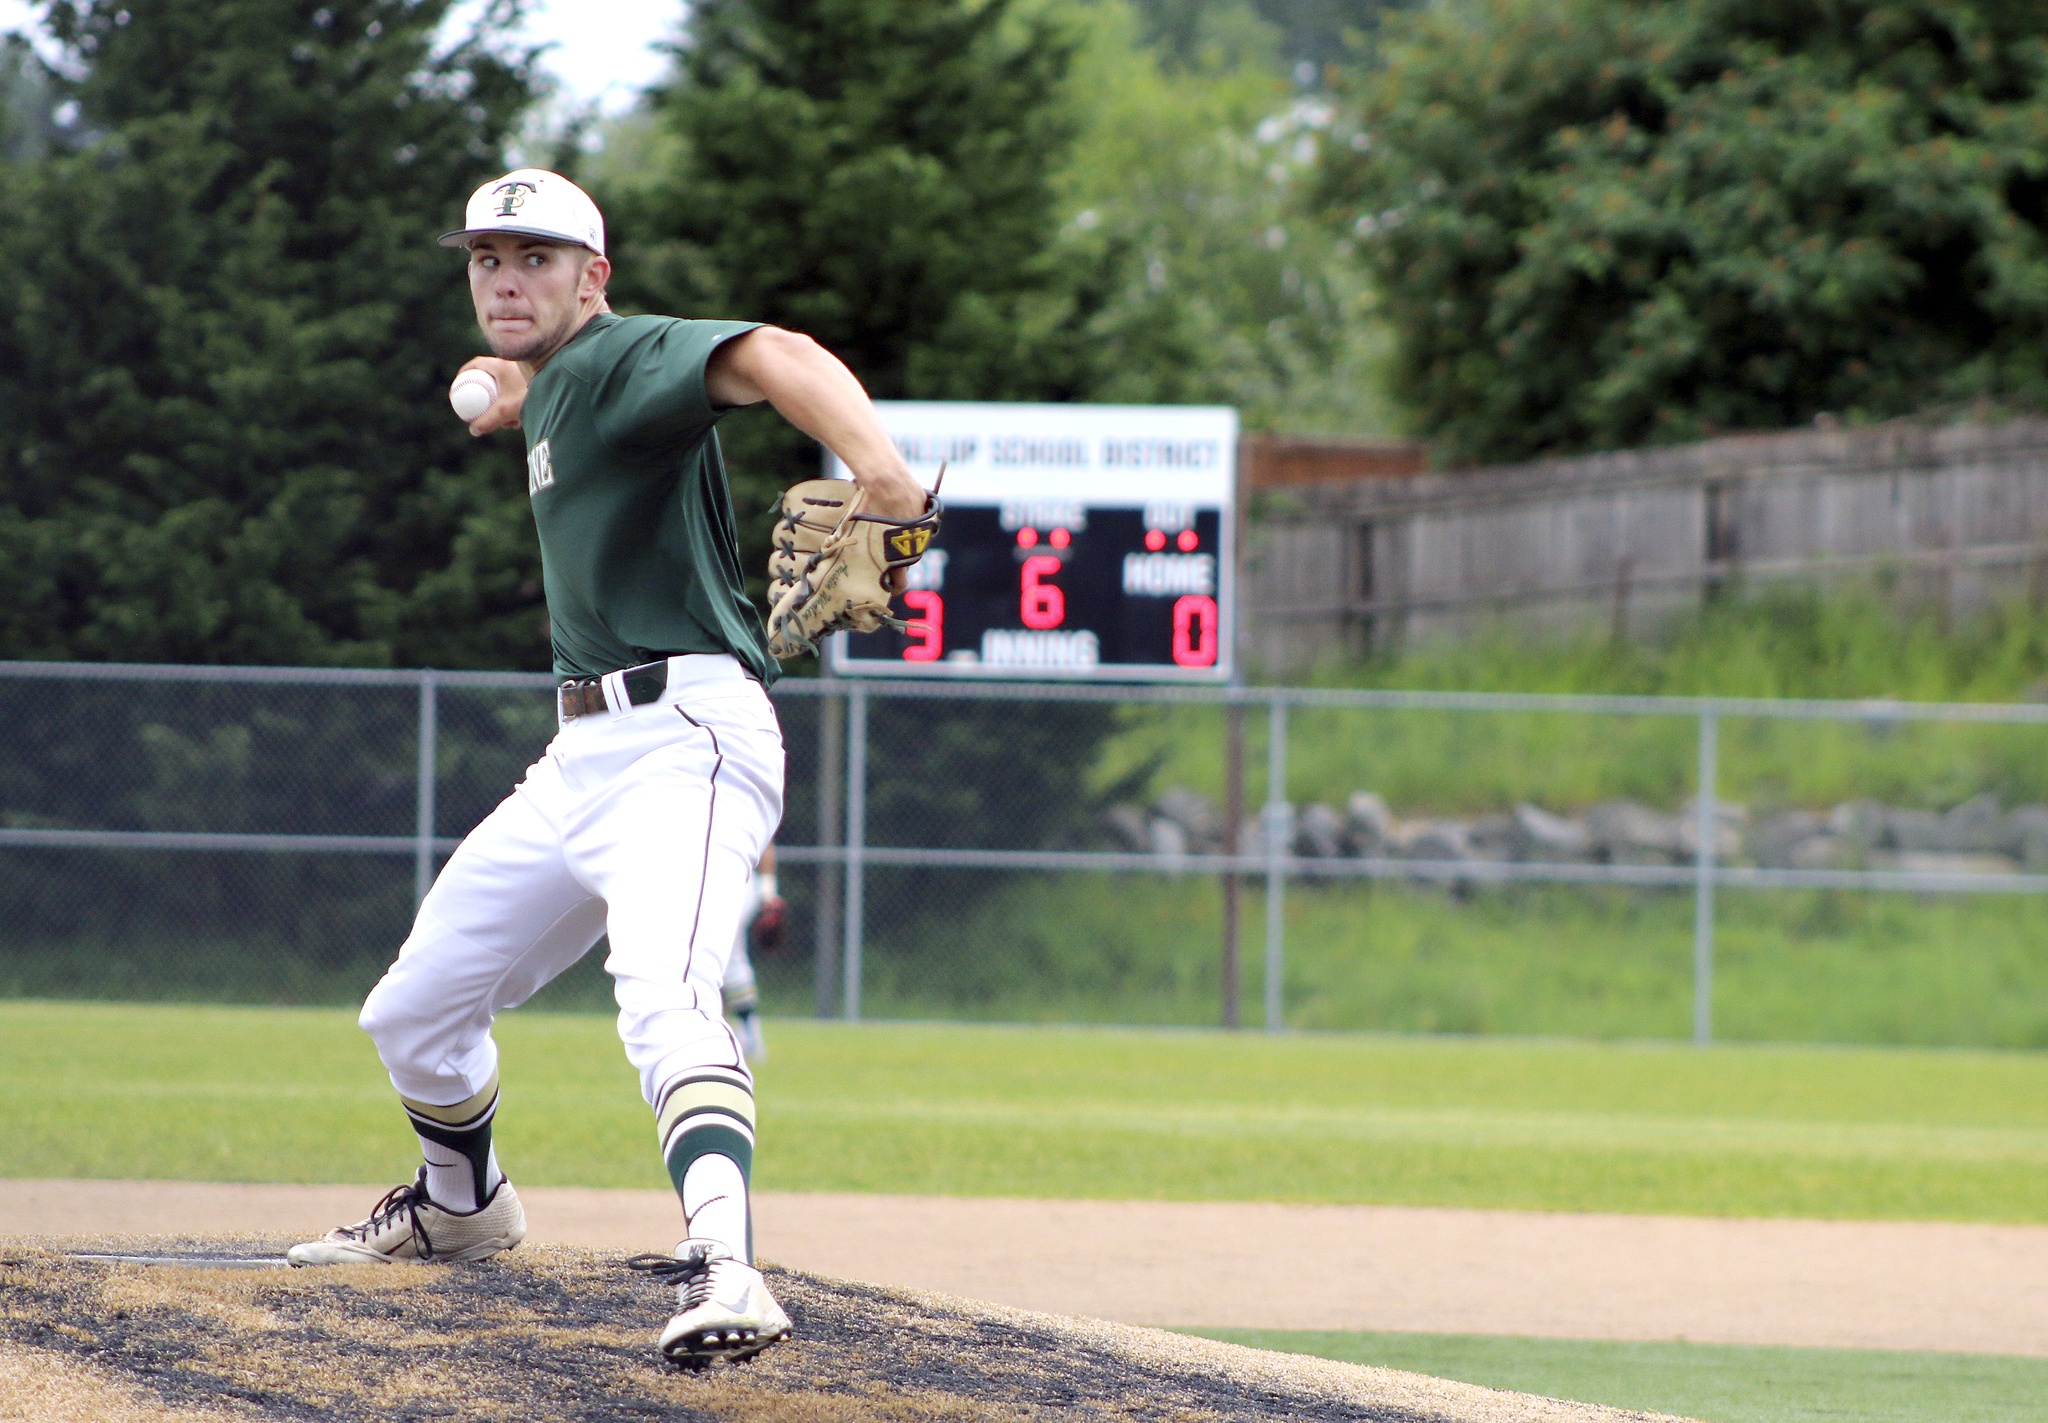 Austin Whalen pitched a complete game for Timberline